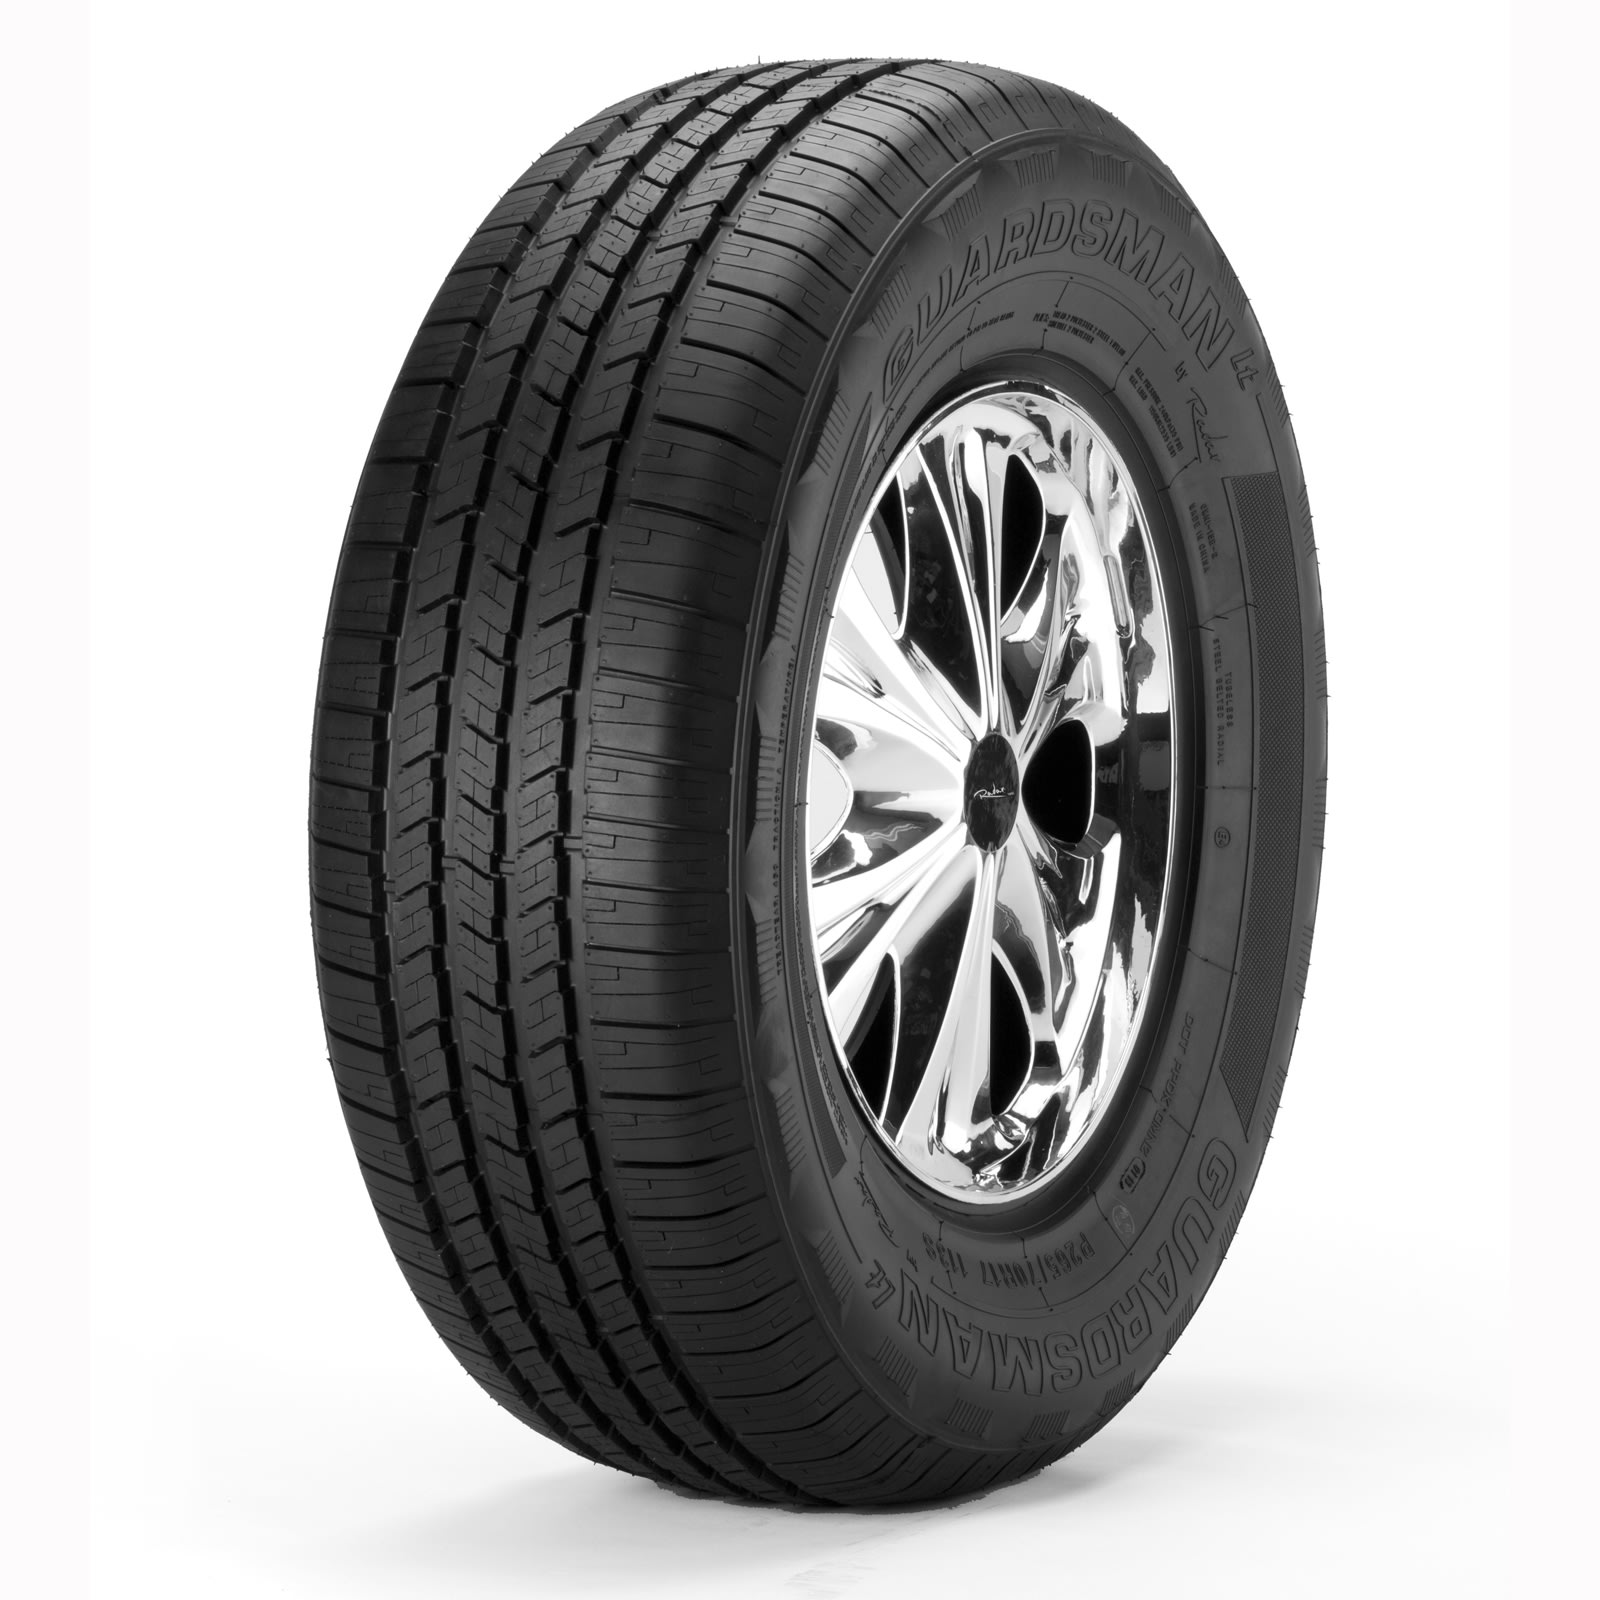 Do You Need Affordable Tires? Buy Guardsman Tires